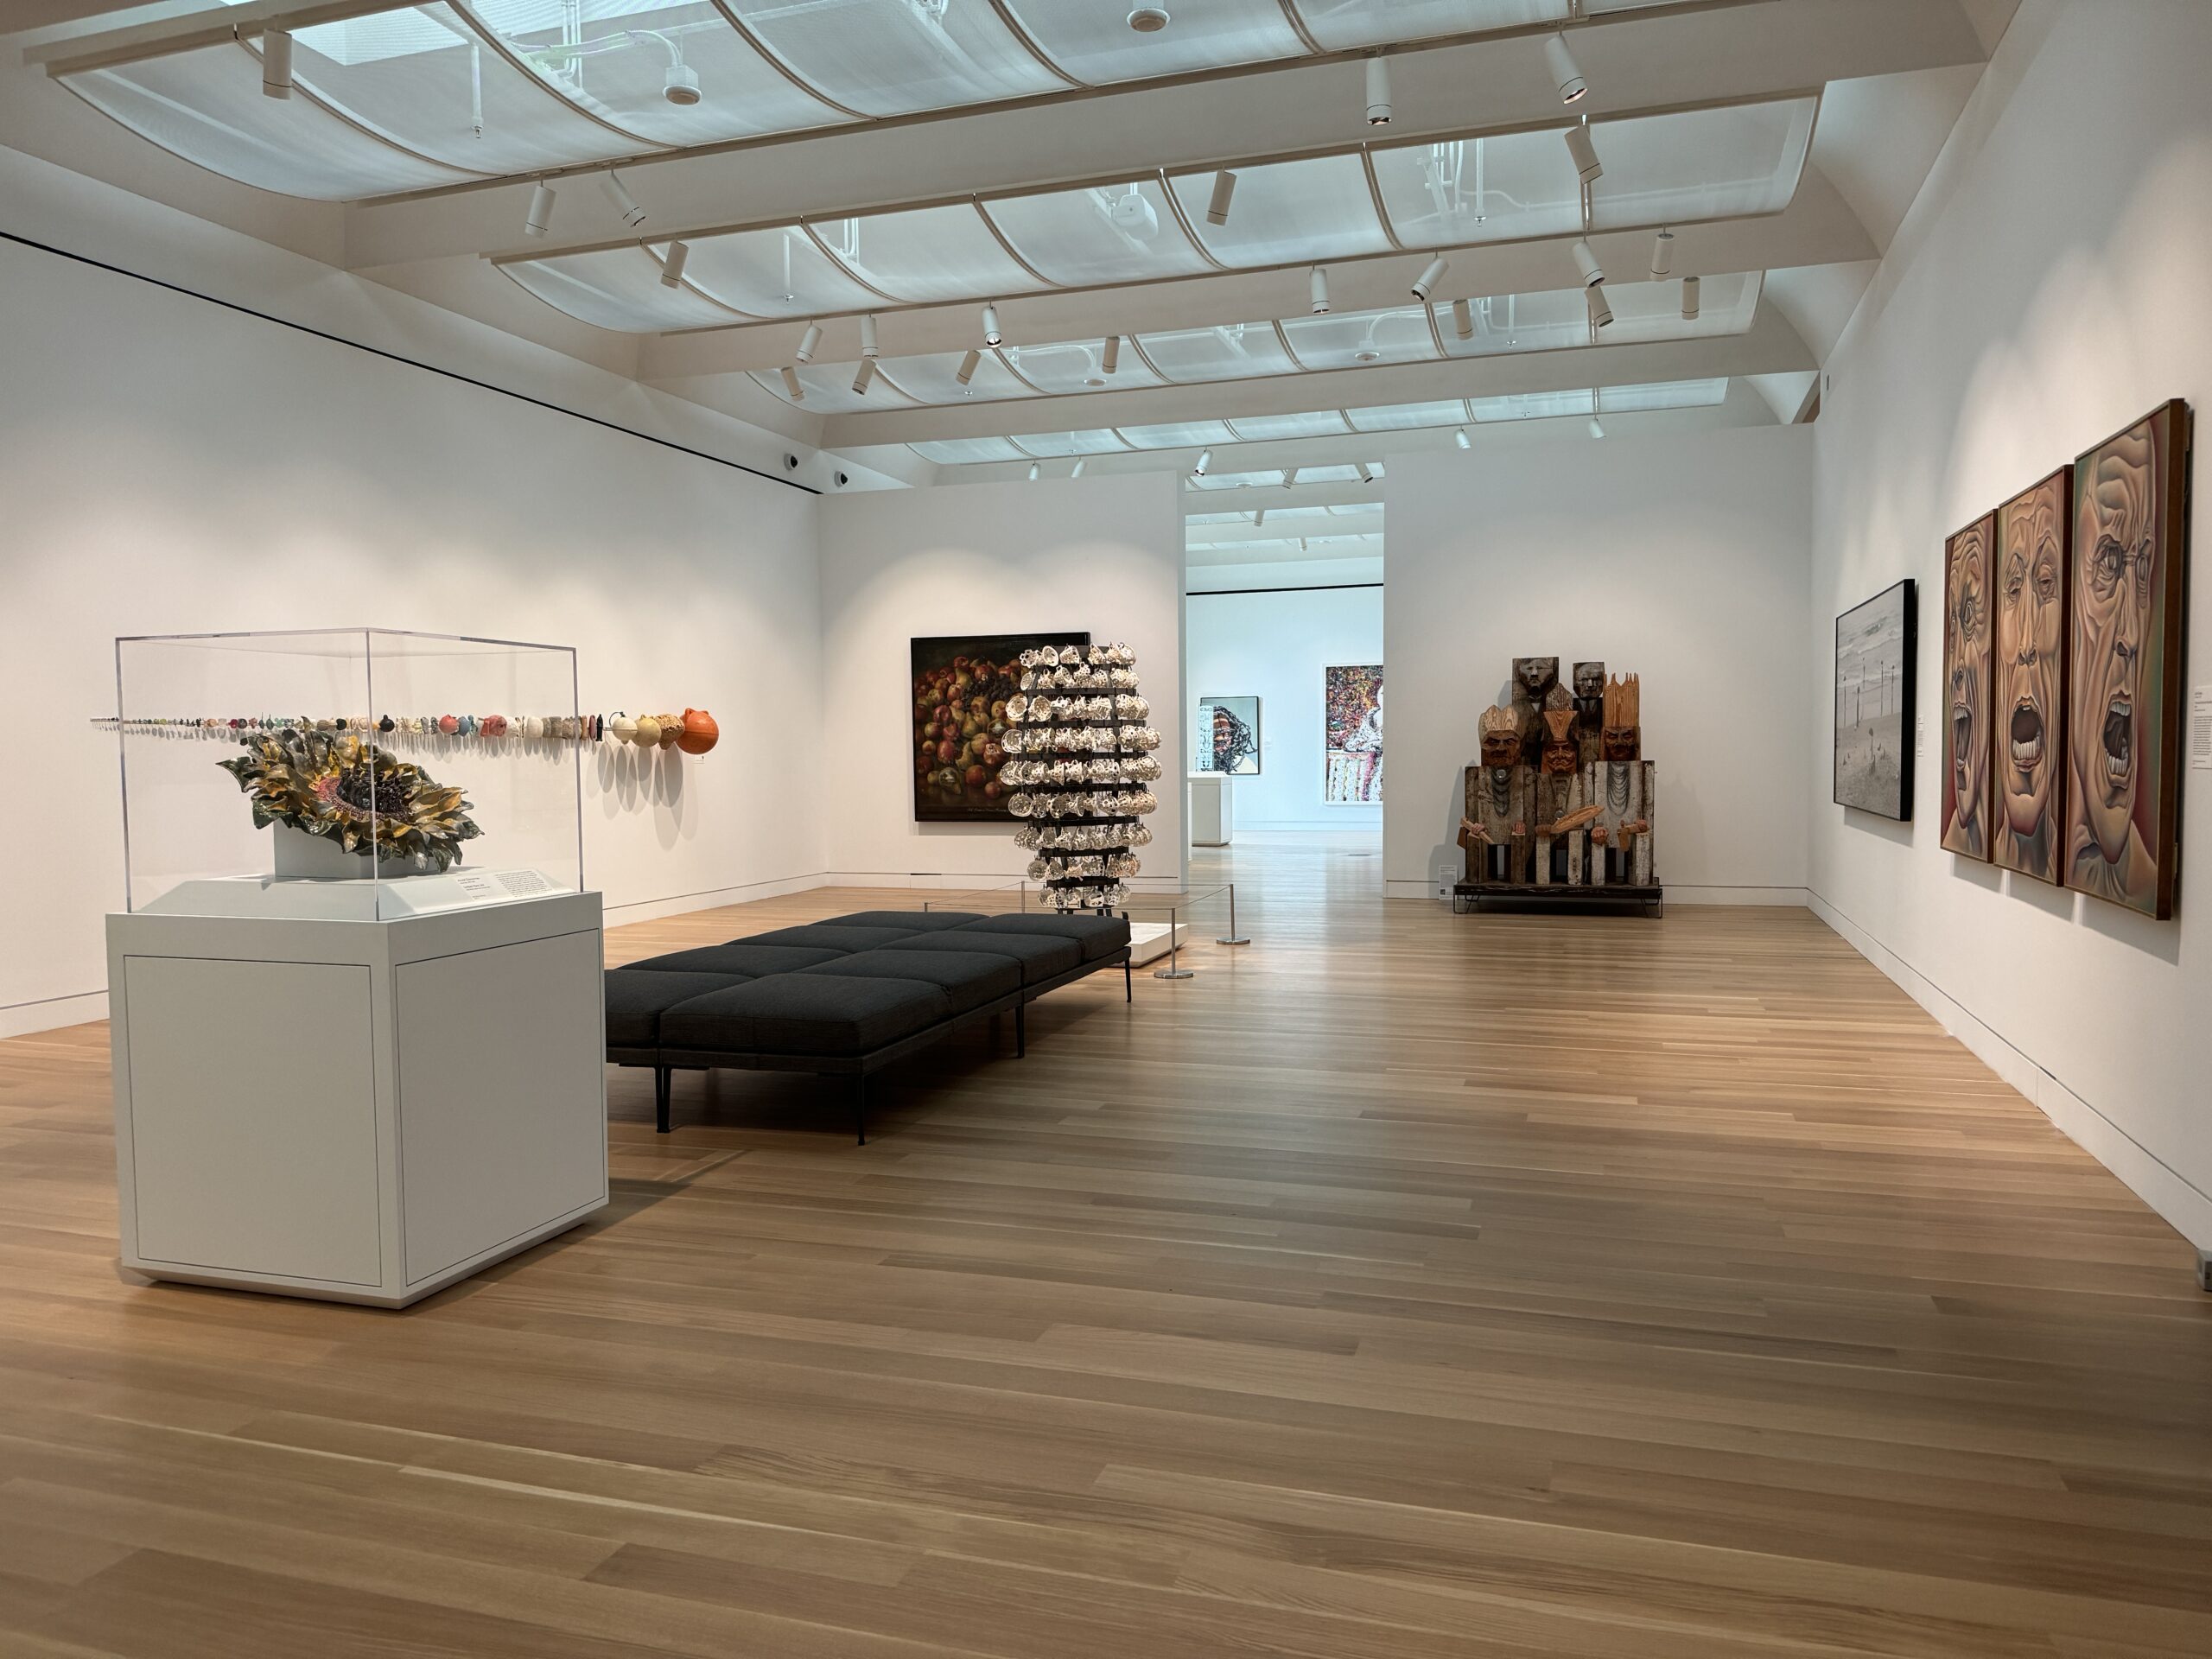 Global Contemporary Galleries